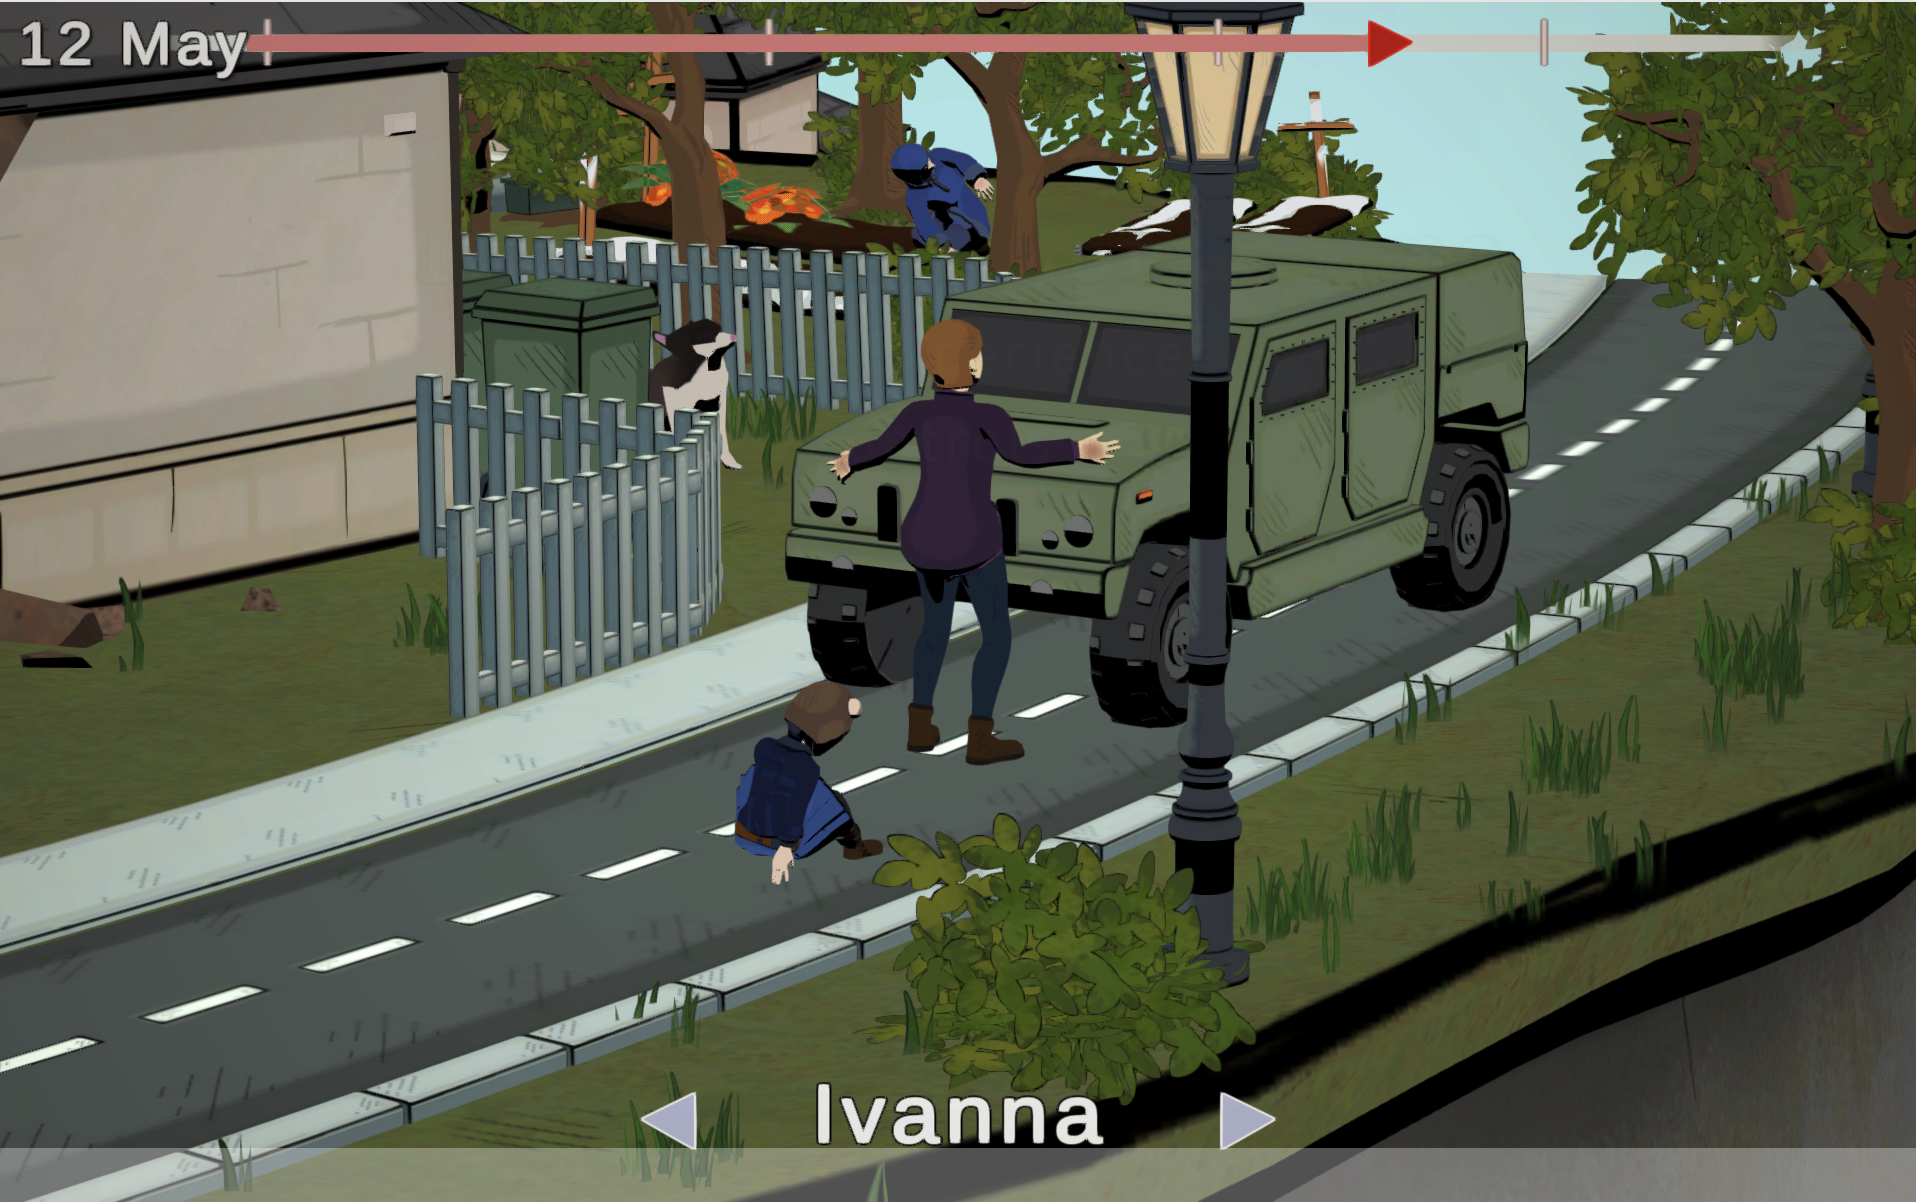 Interactive story that shows the daily lives of Ukrainian citizens as they are catapulted into war. 